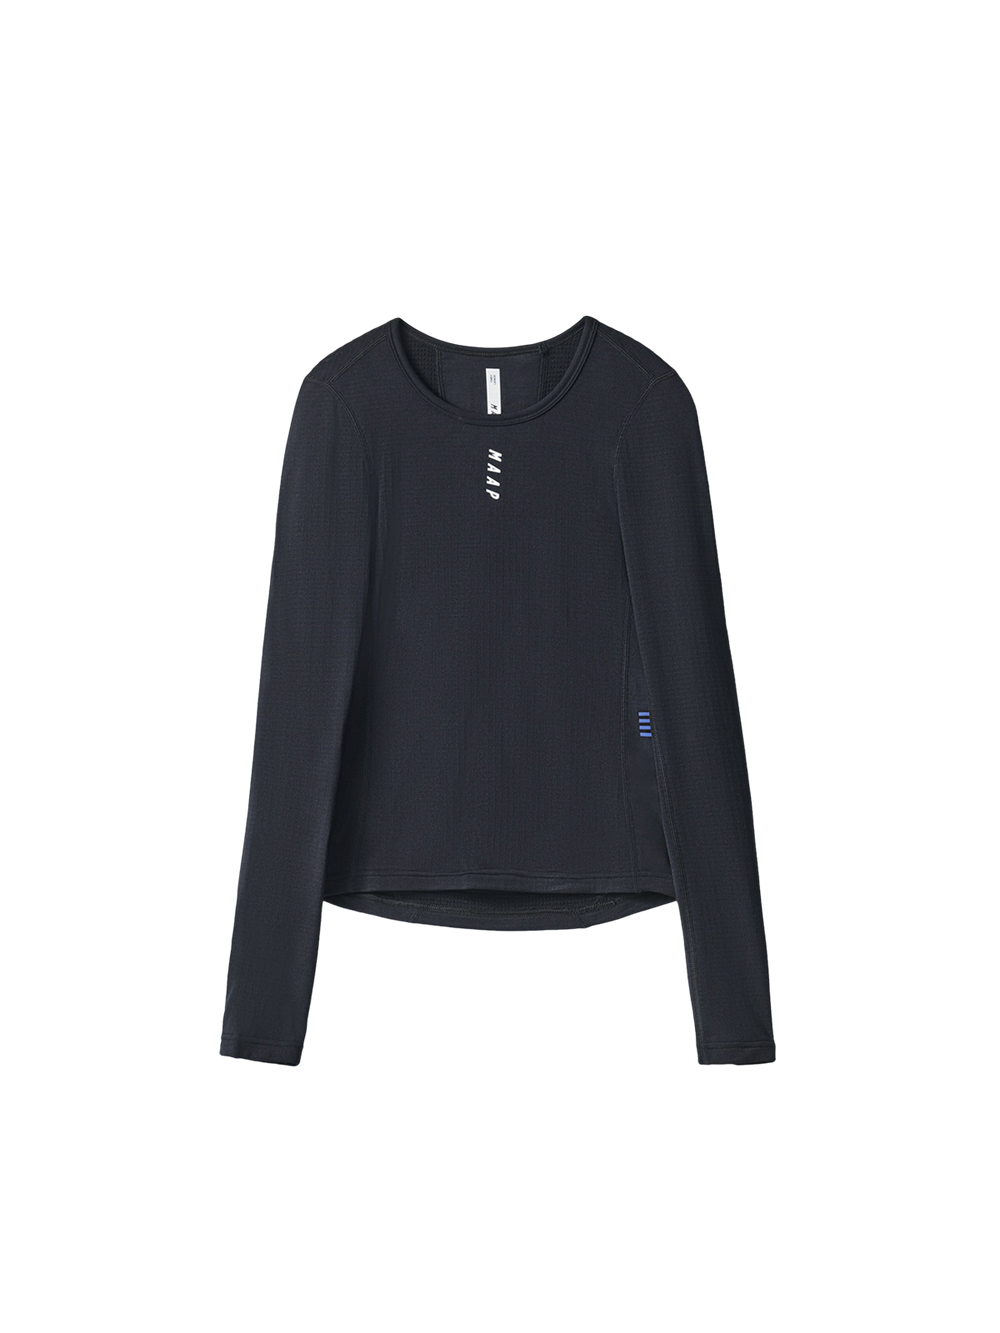 Product Image for Women's Thermal Base Layer LS Tee